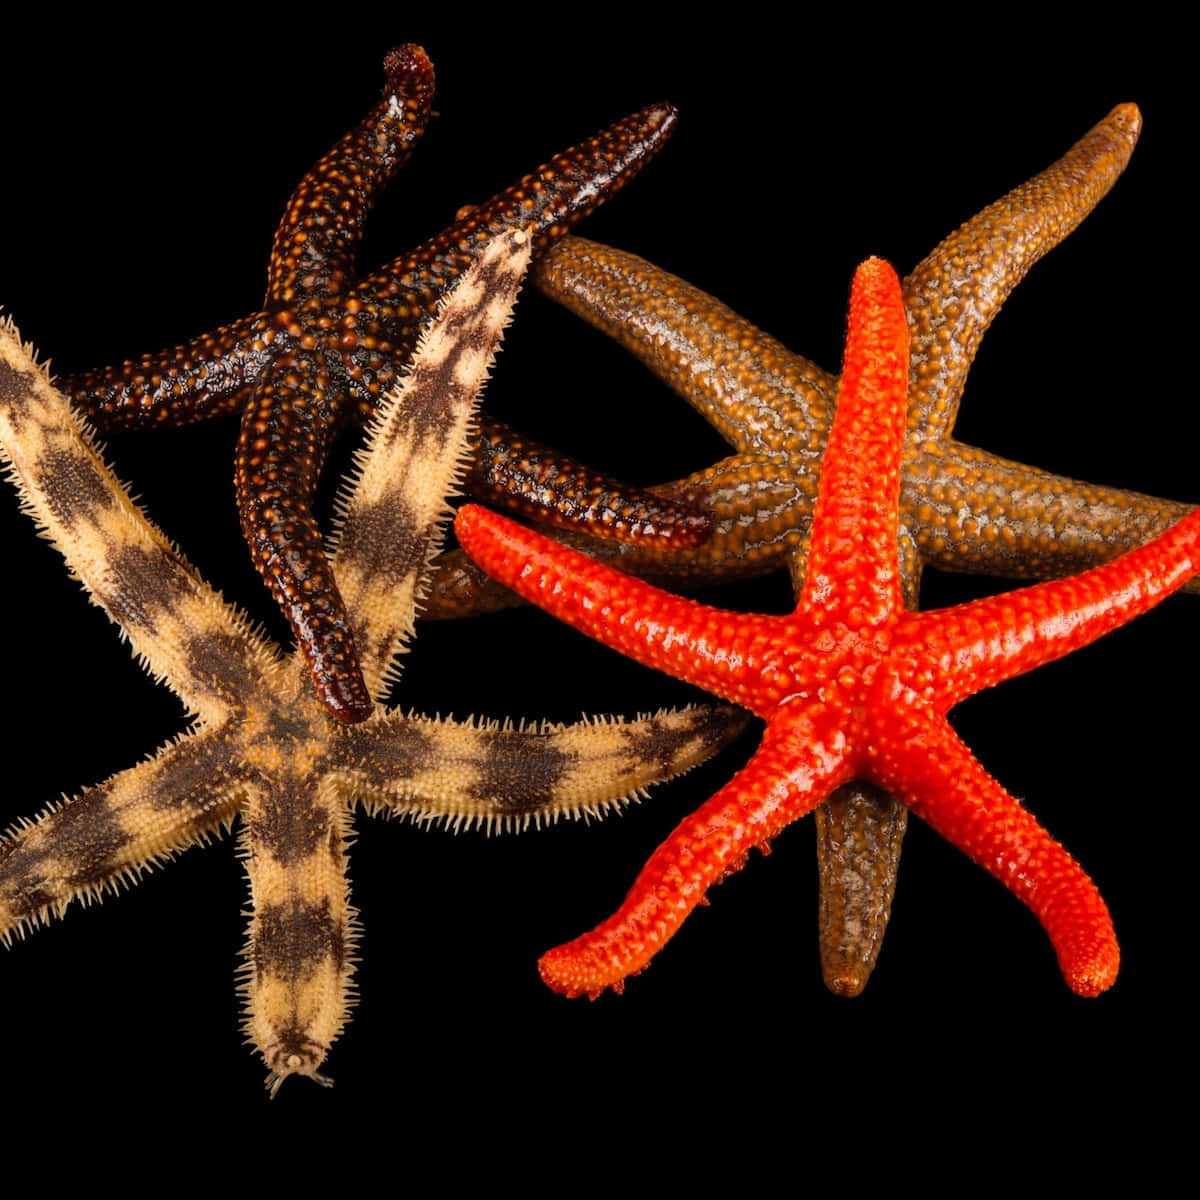 An Exquisite Close Up Image of a Starfish